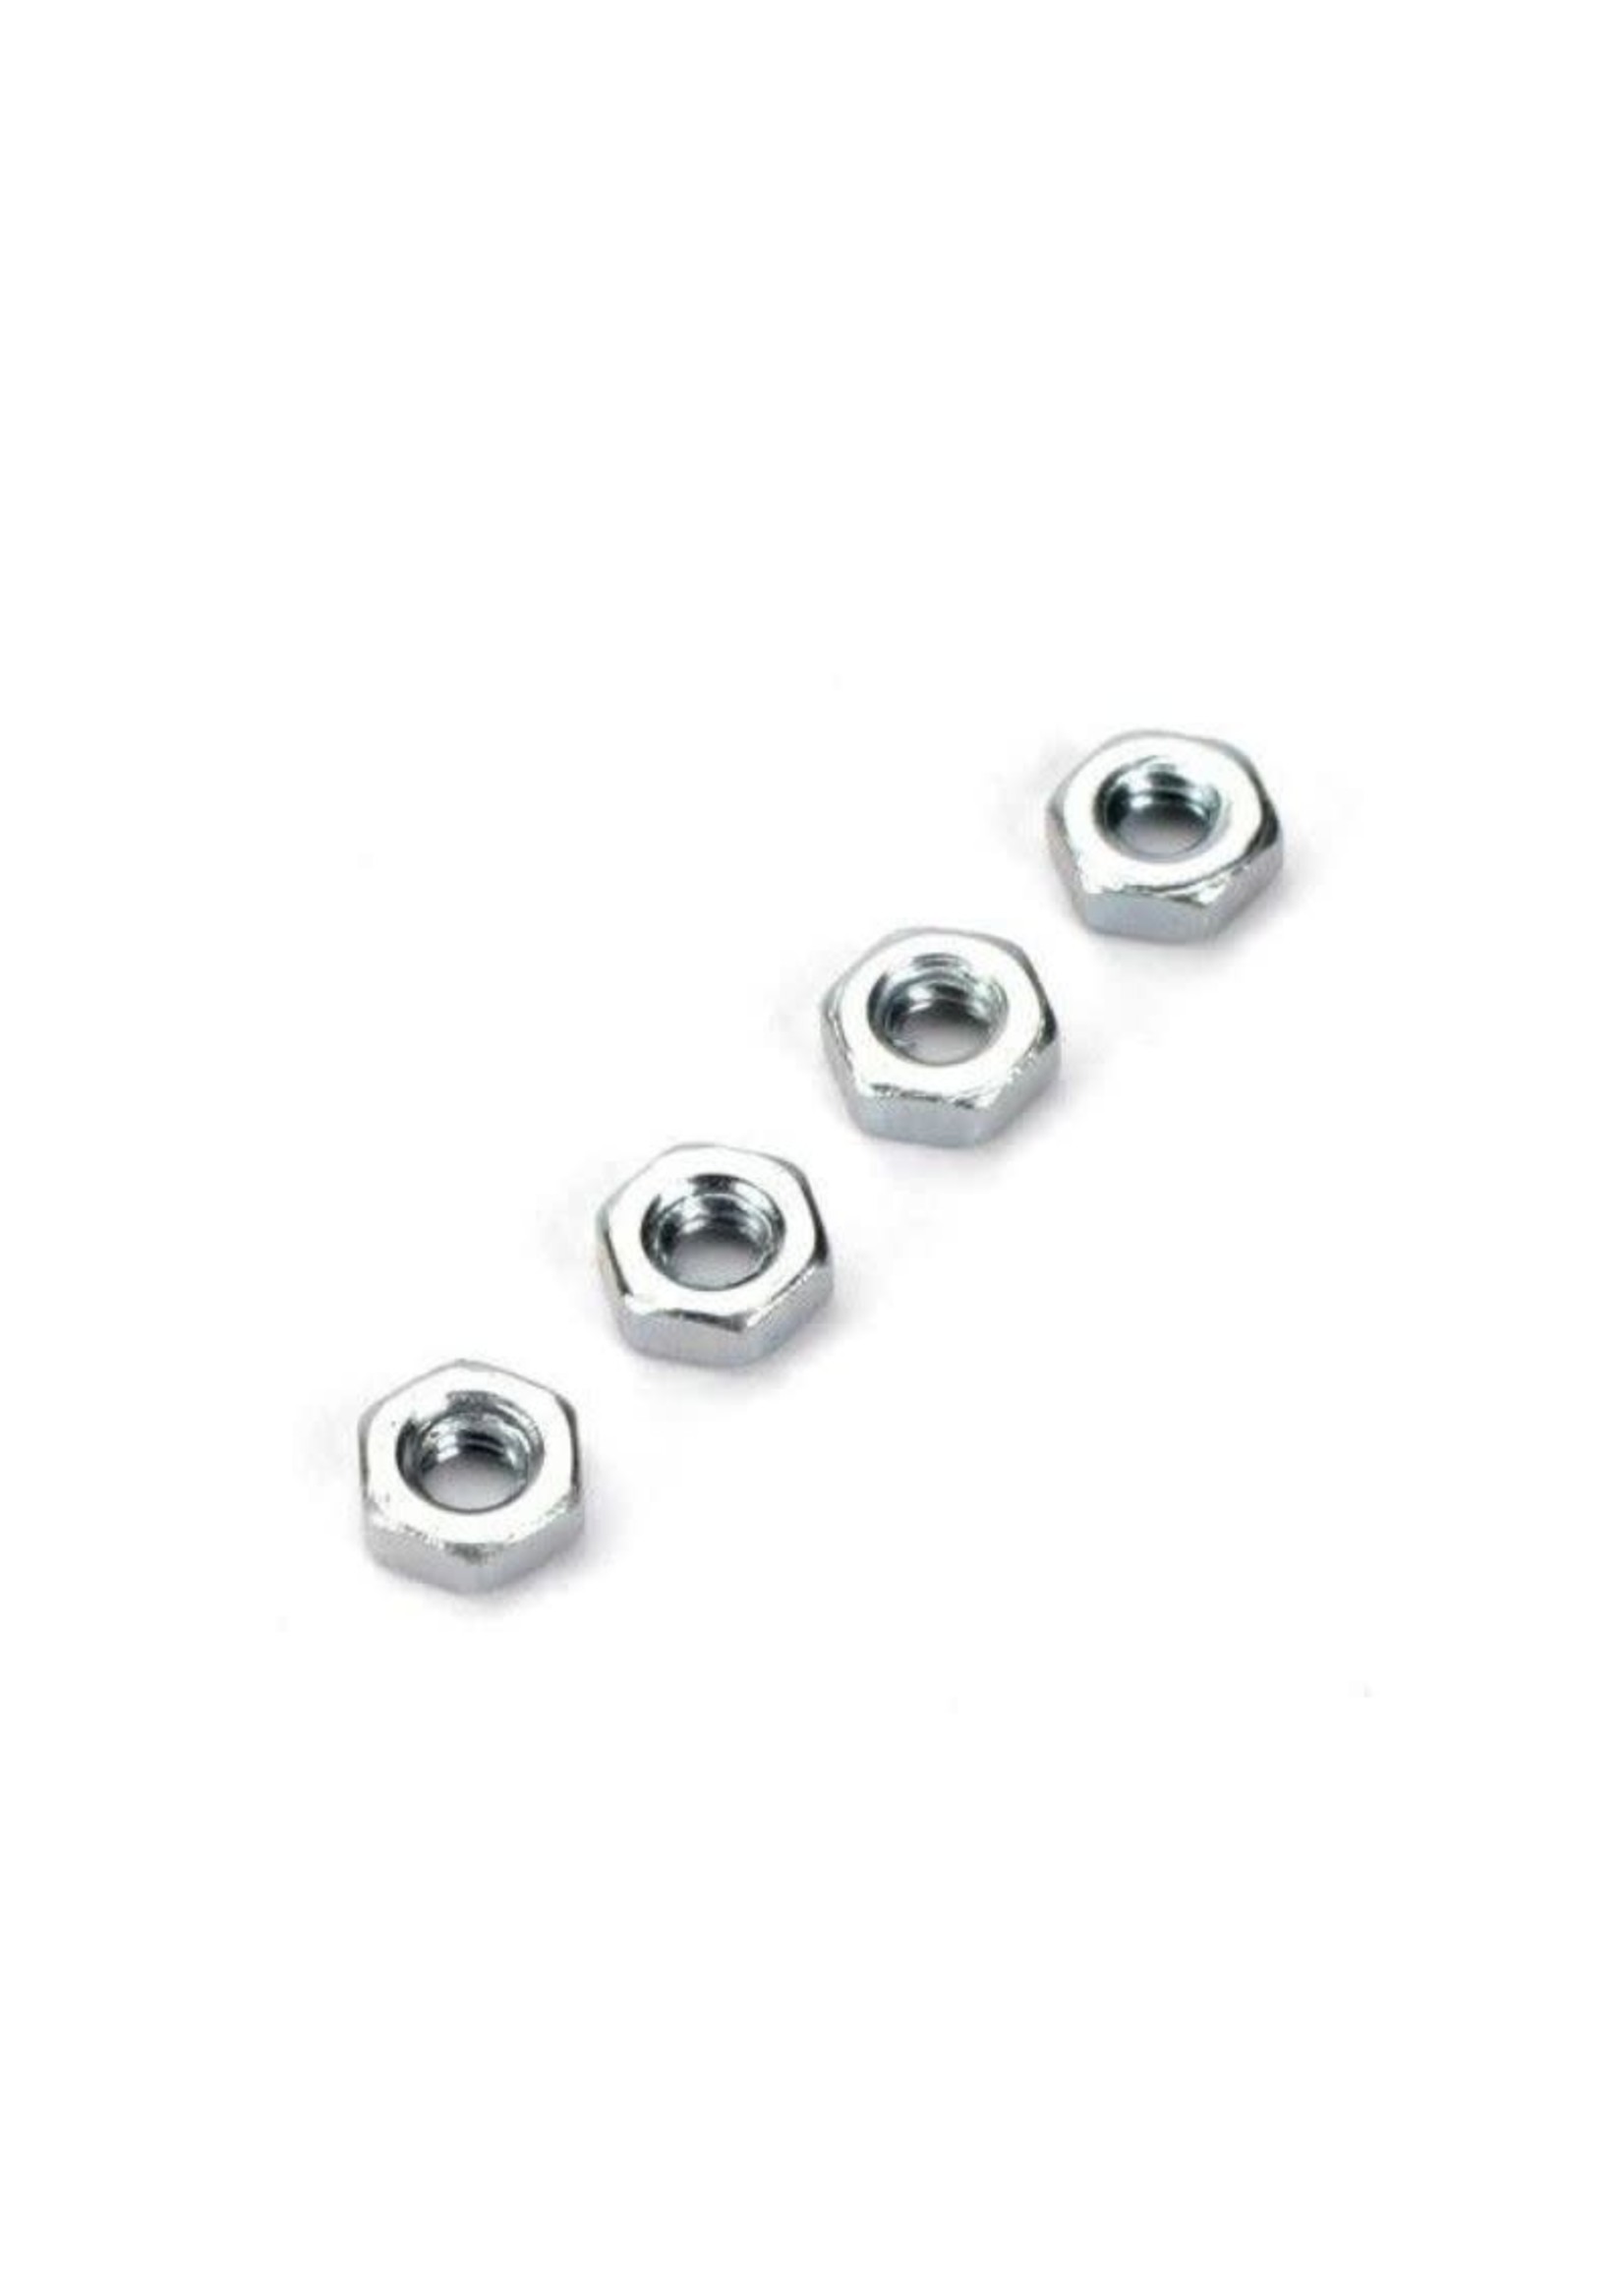 Dubro DUB2104 Dubro 2.5mm Hex Nuts